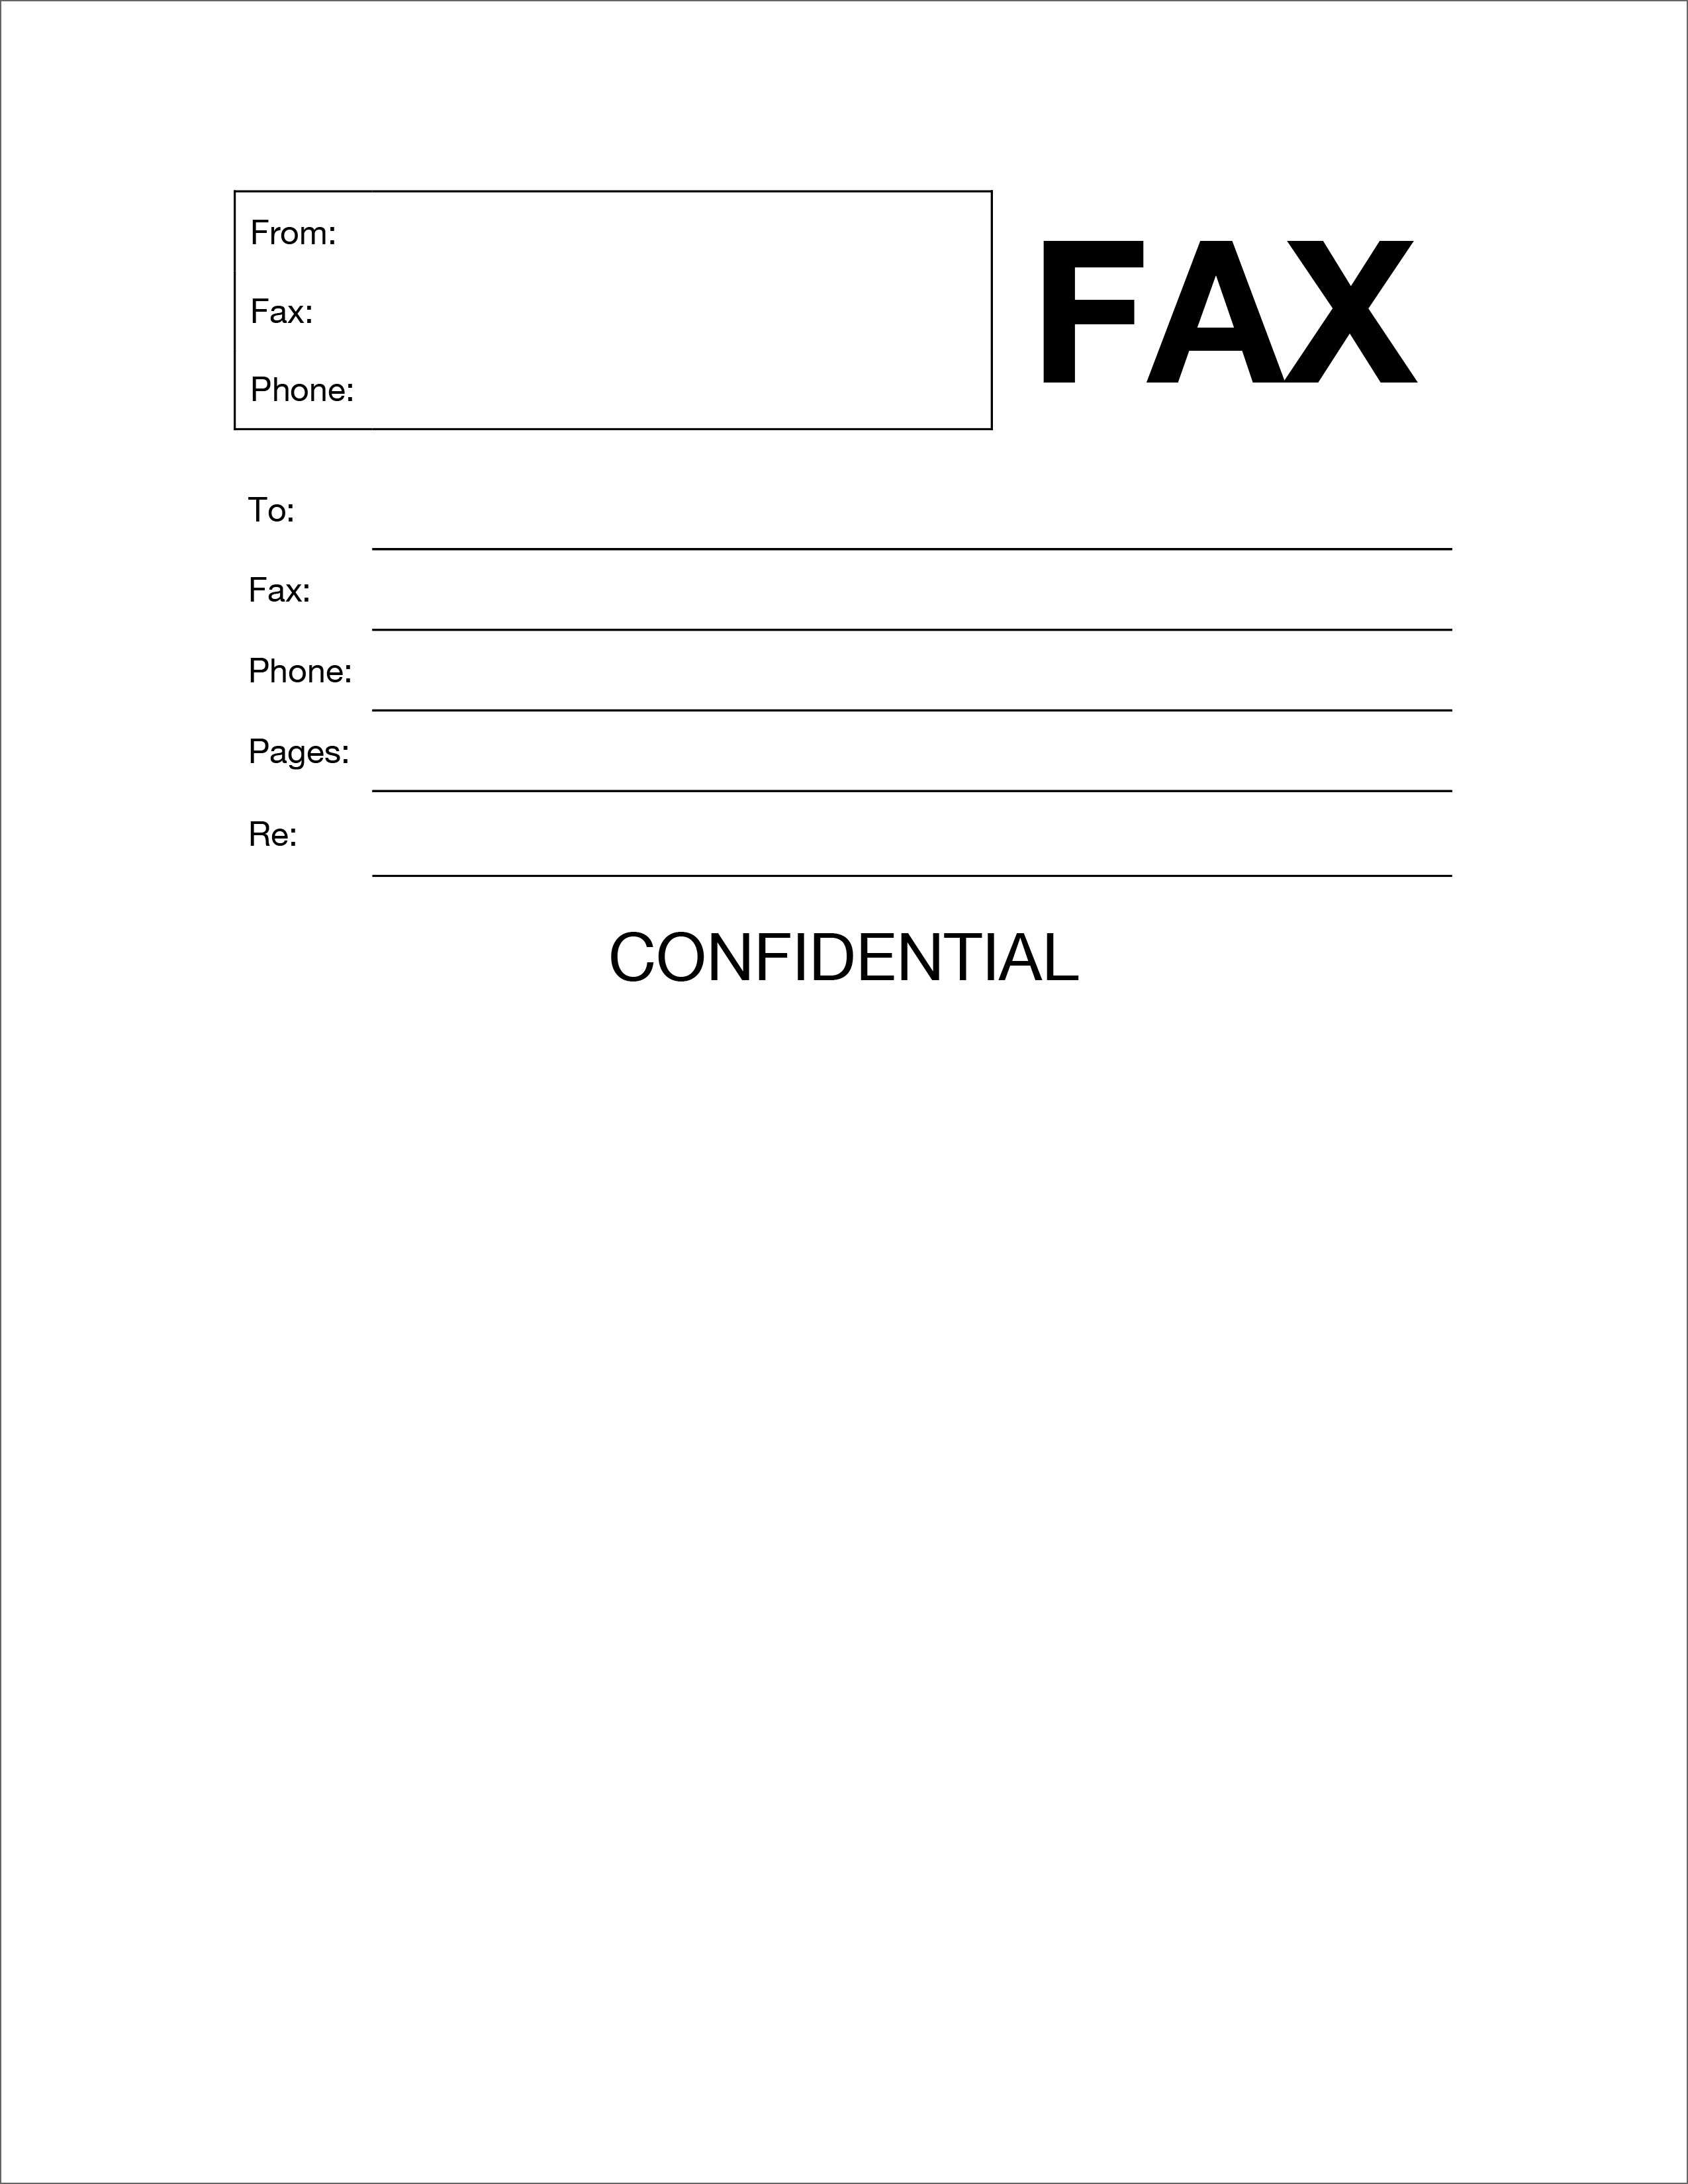 005 Fax Cover Template Ideas Exceptional Letter Simple Sheet Pertaining To Fax Cover Sheet Template Word 2010